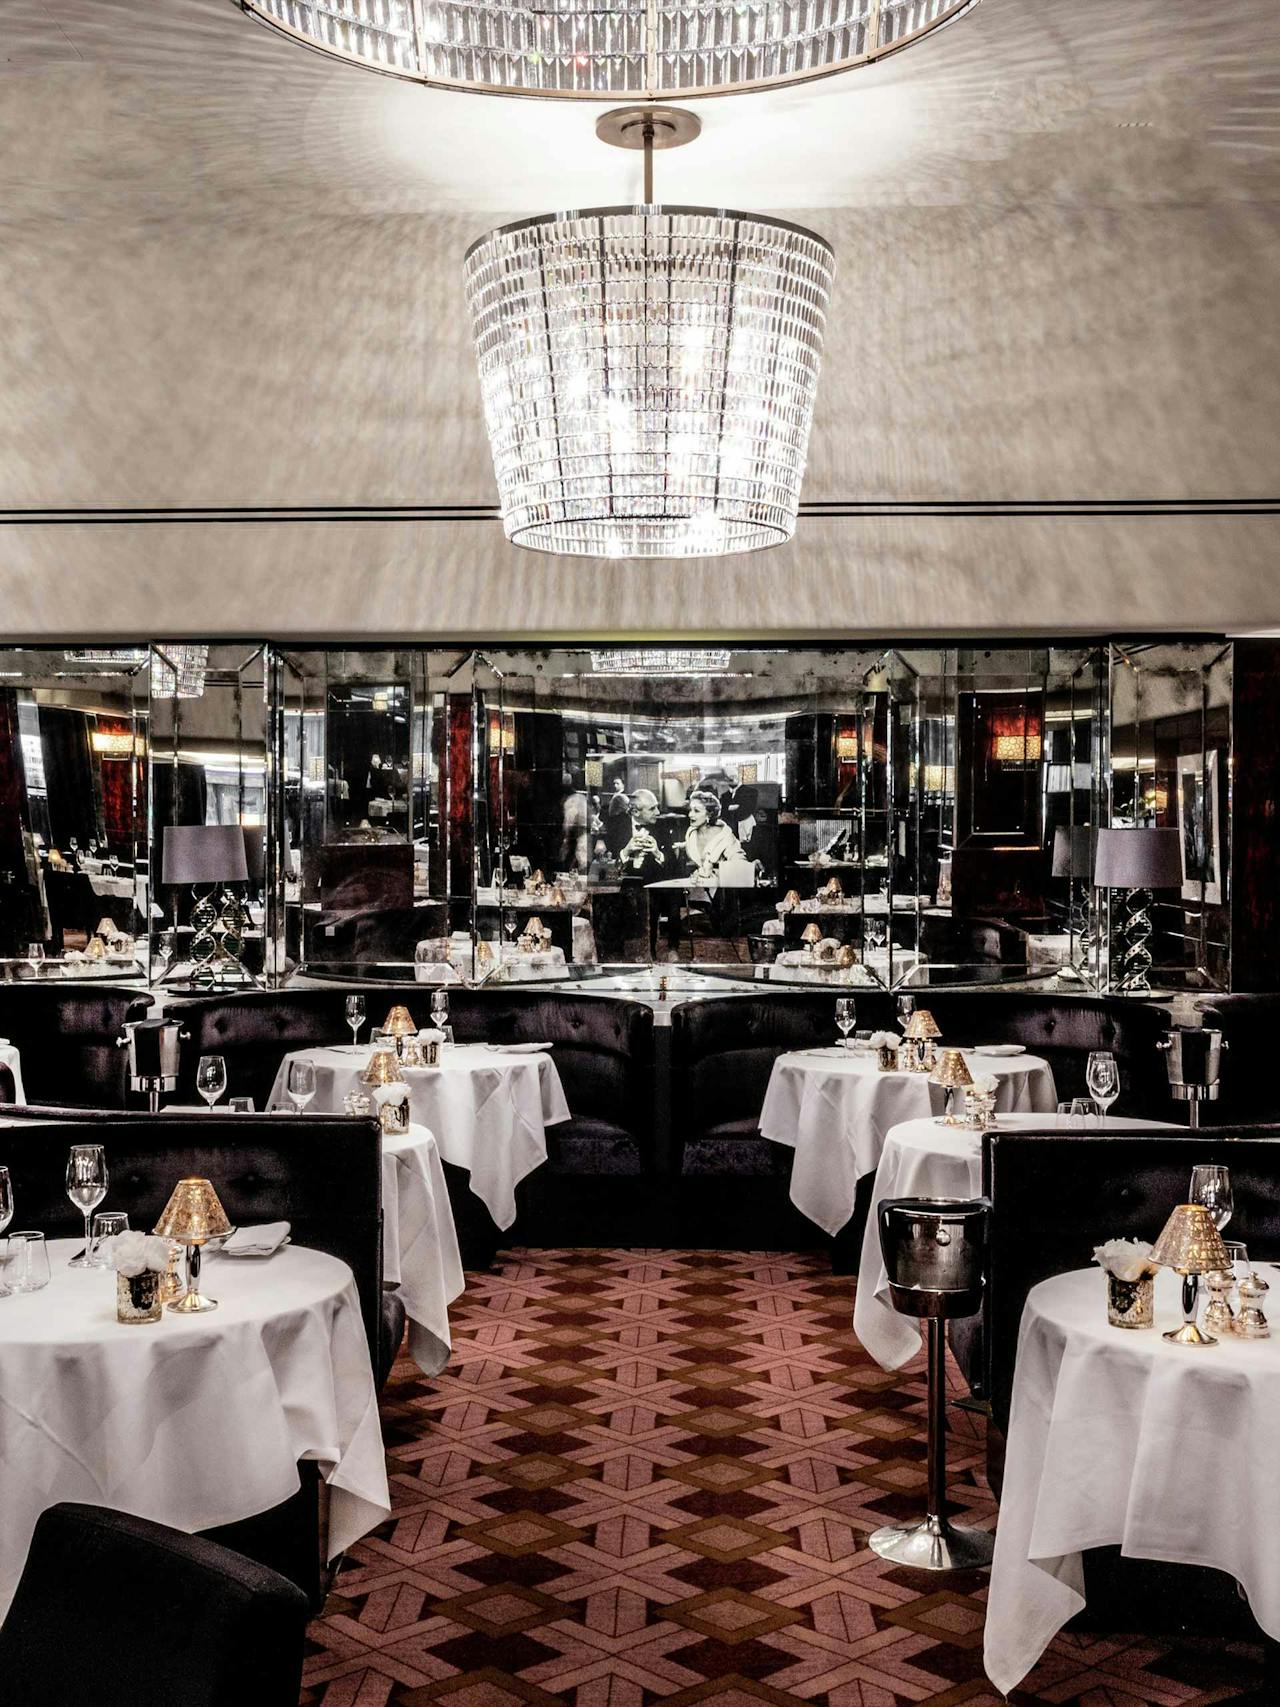 Image: The Savoy Grill